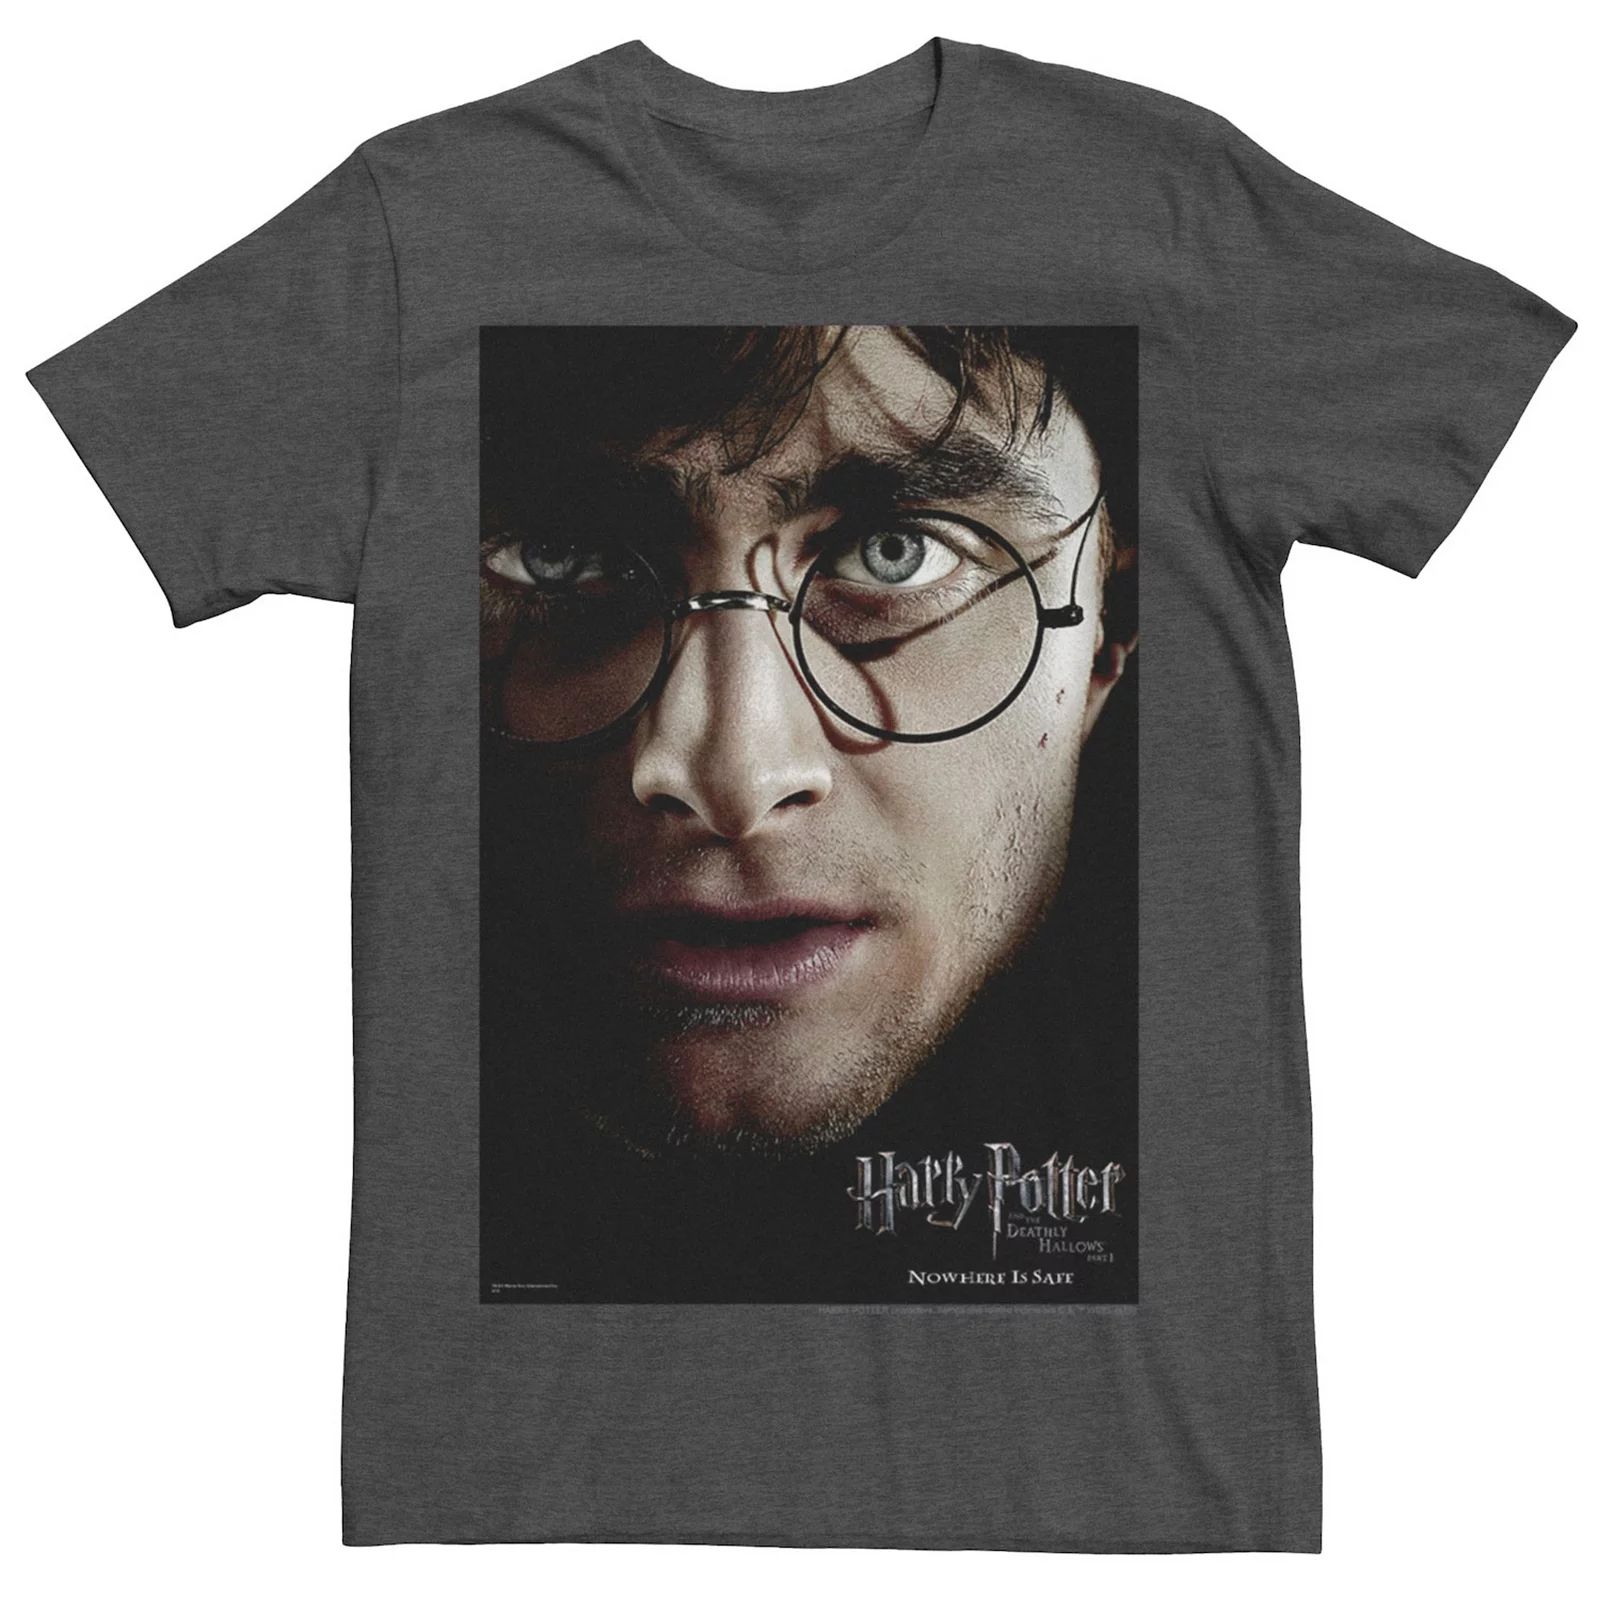 Men's Harry Potter Deathly Hallows Harry Potter Poster Graphic Tee, Size: Large, Dark Grey | Kohl's